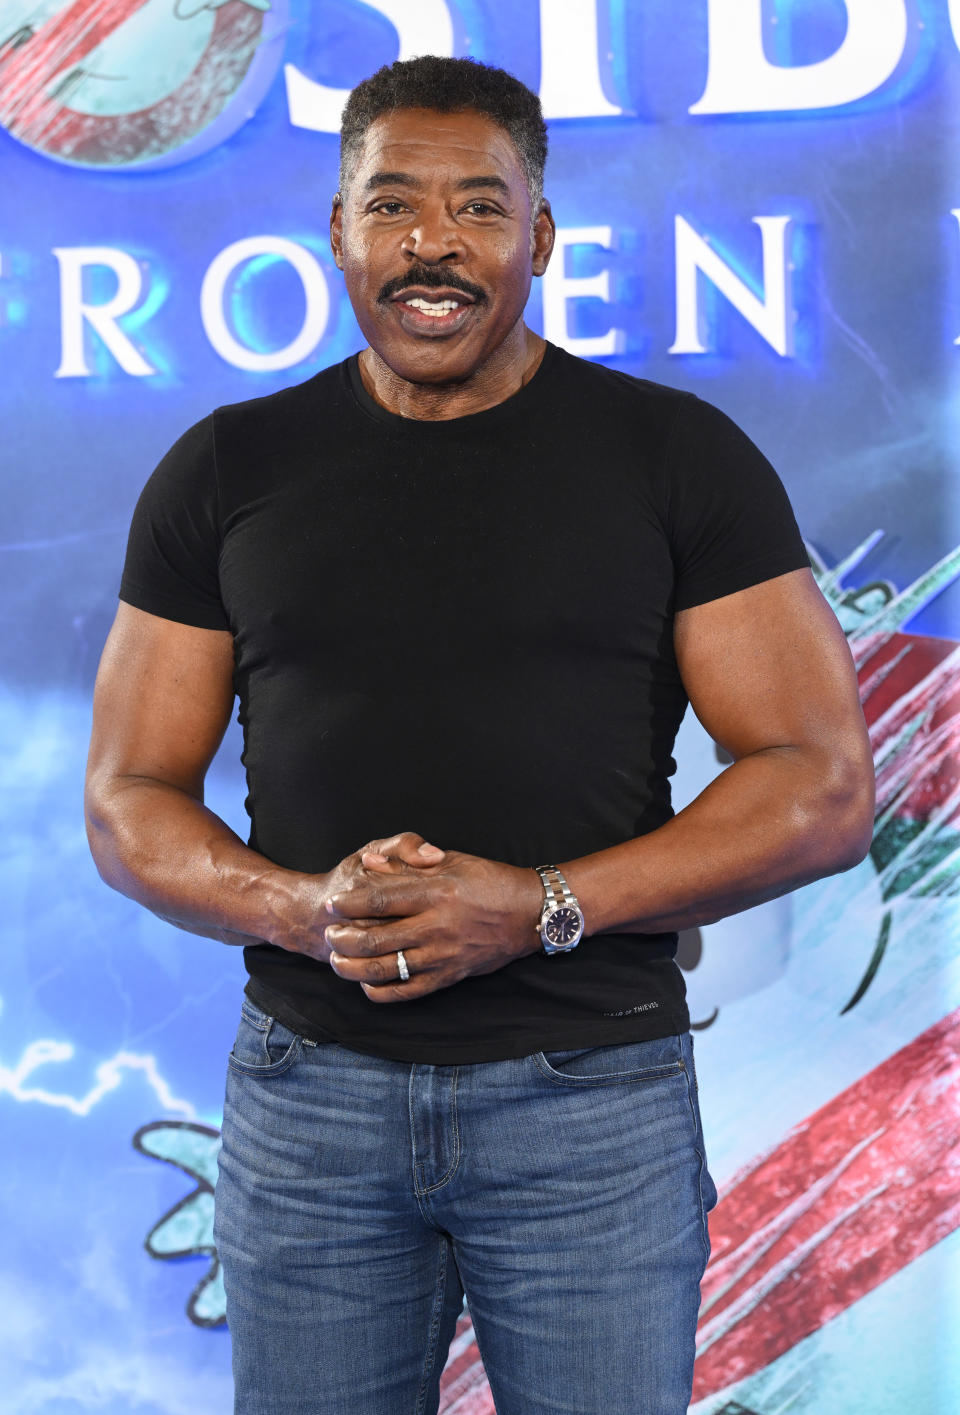 Ernie Hudson posing in a black fitted t-shirt at a "Ghostbusters: Afterlife" promotional event